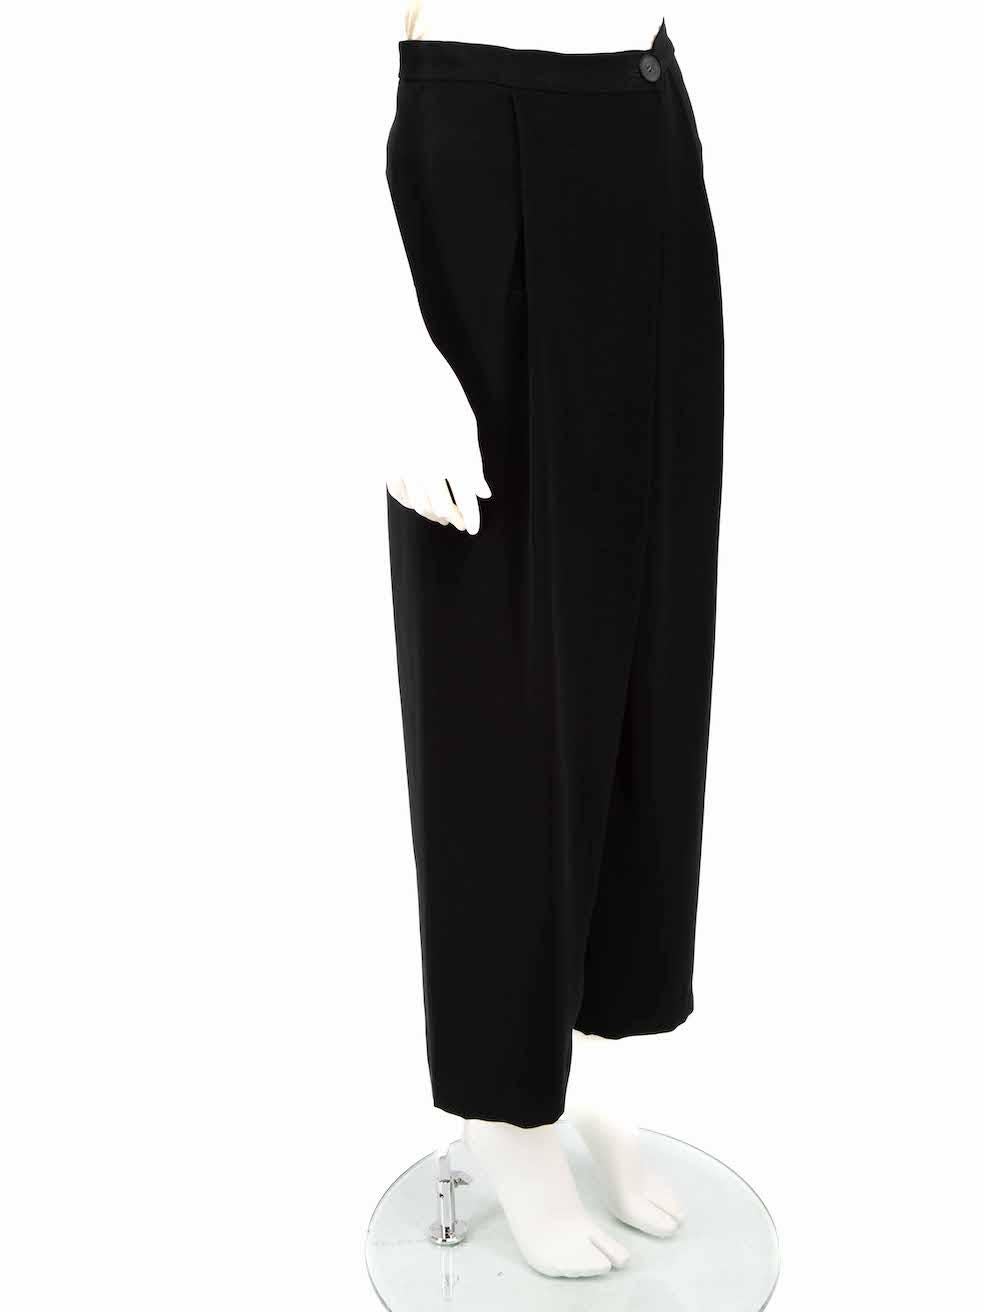 CONDITION is Very good. Hardly any visible wear to trousers is evident on this used McQ designer resale item.
 
 Details
 Black
 Polyester
 Trousers
 Tapered leg
 Cropped
 High rise
 2x Side pockets
 2x Back pockets
 Fly zip and button fastening
 
